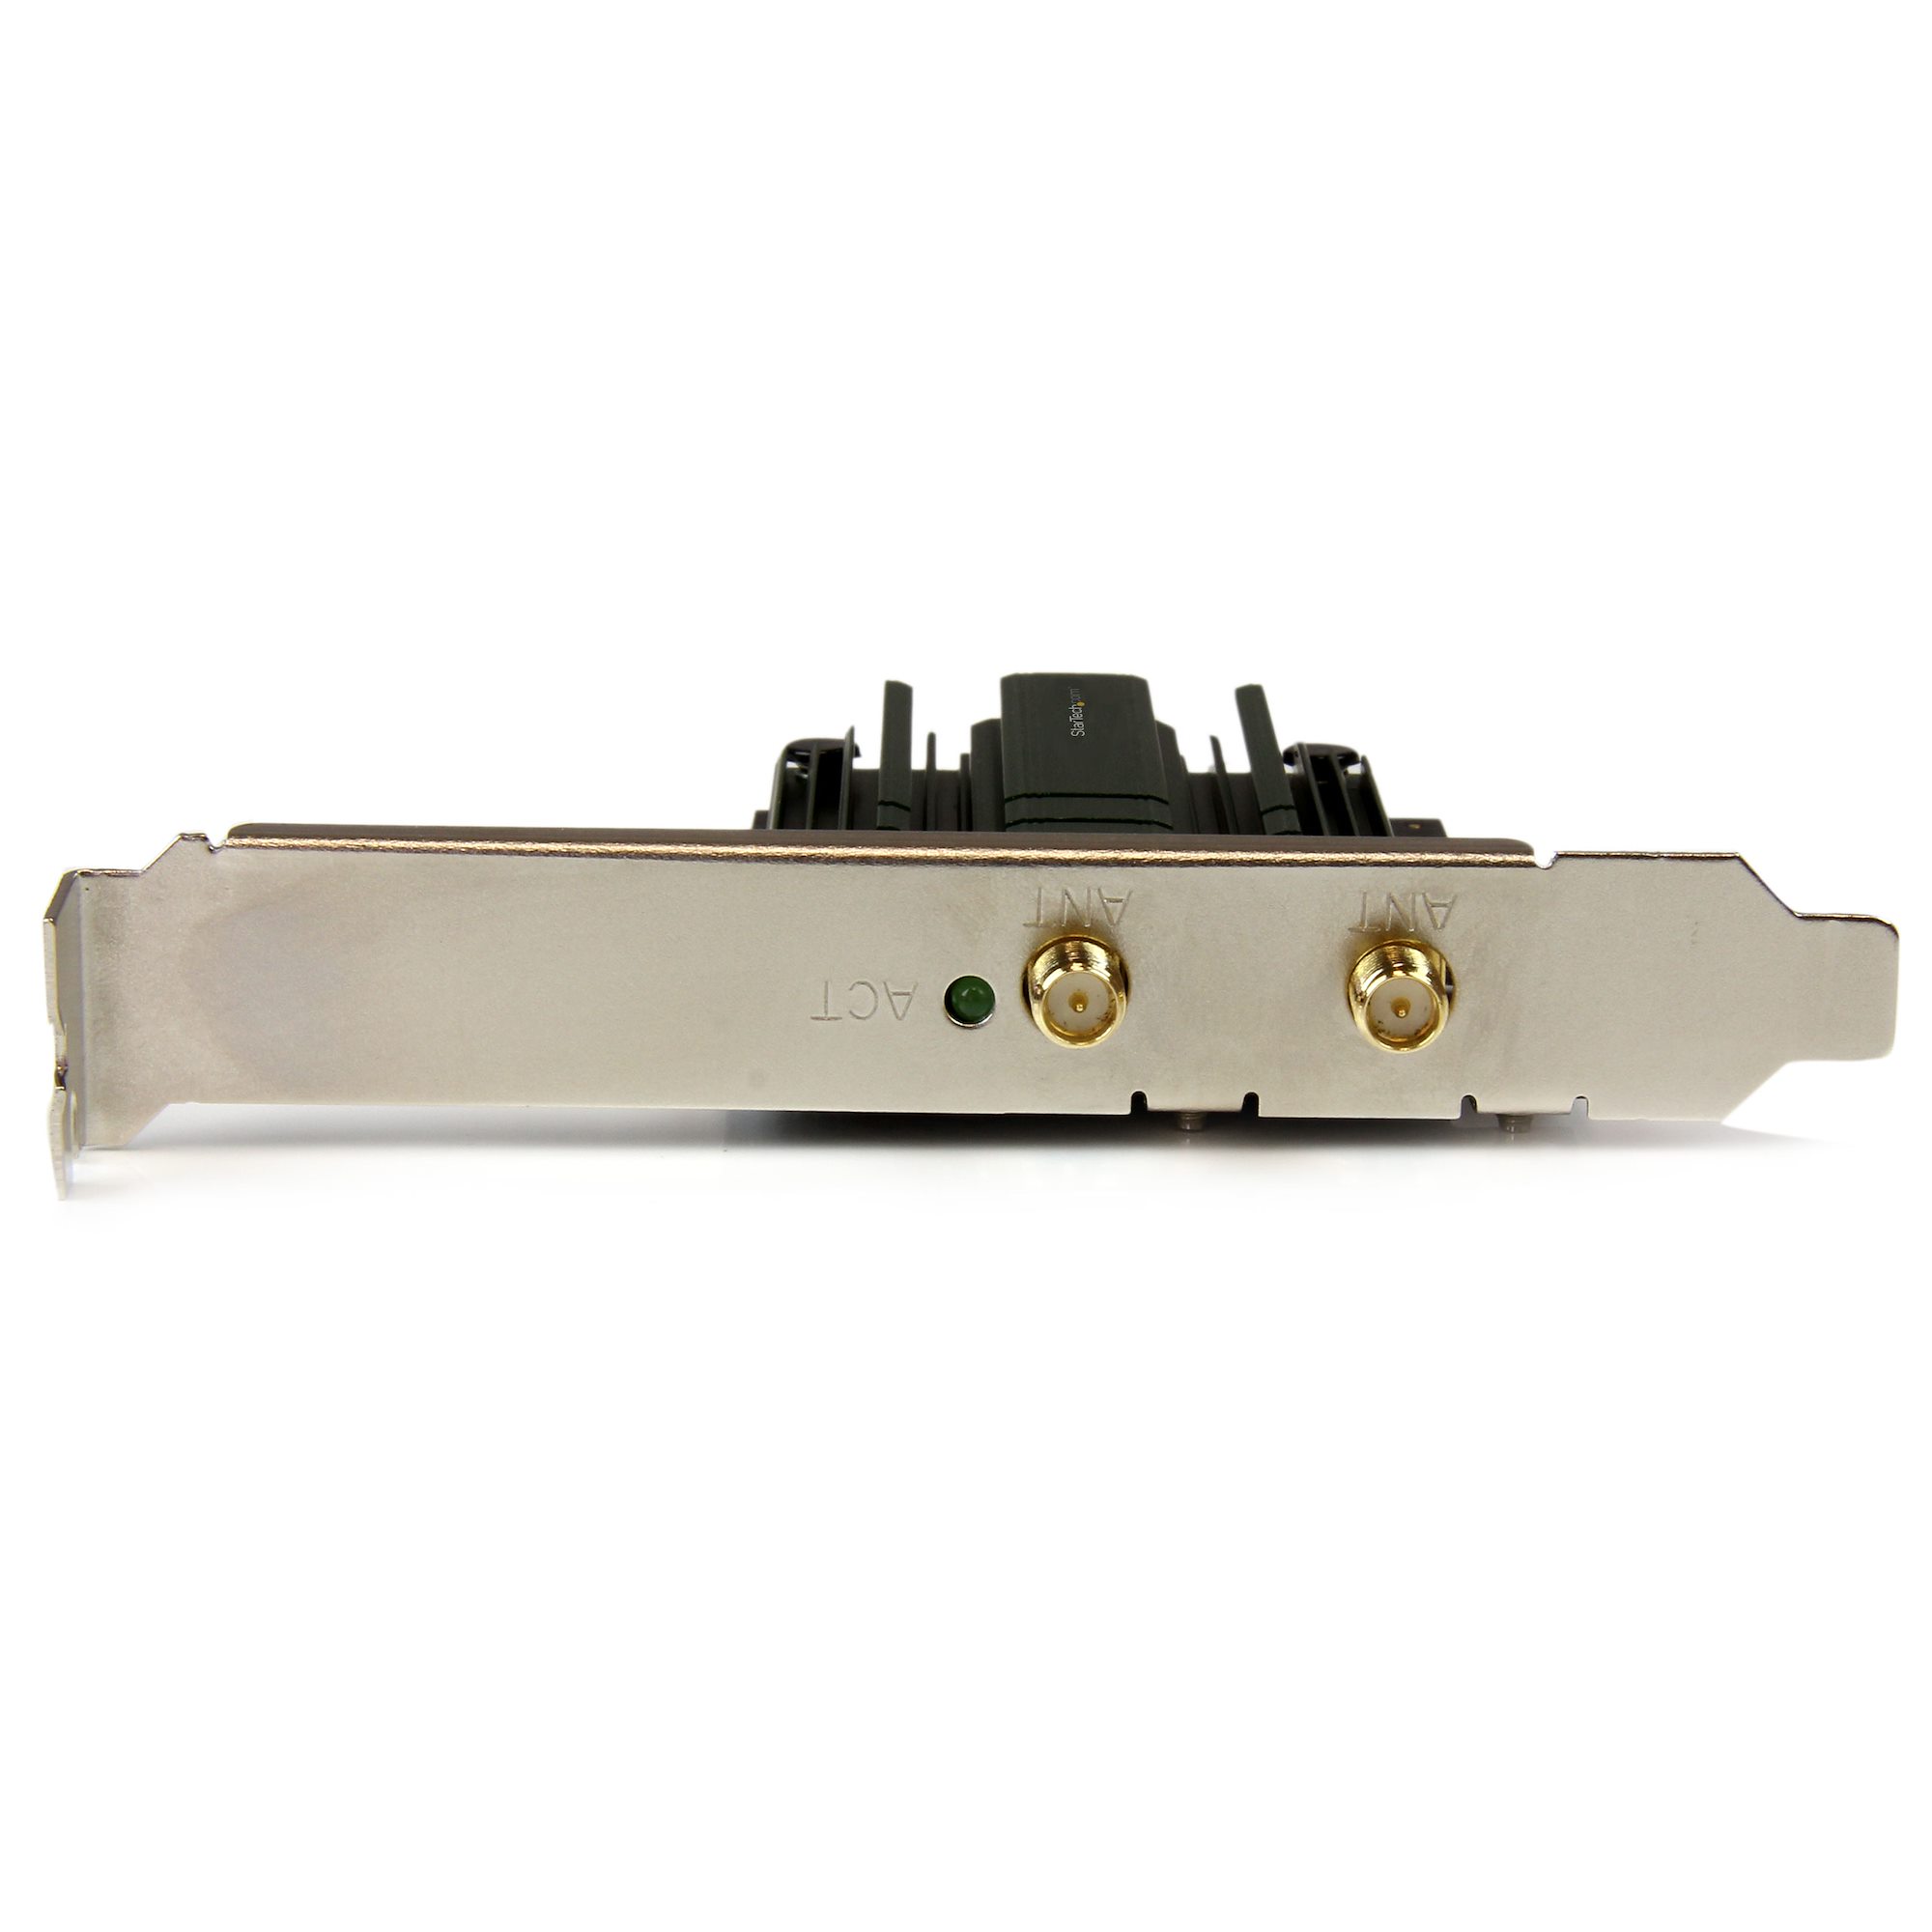 PCIe AC1200 Wireless Network Adapter - Wireless Network Adapters, Networking  IO Products